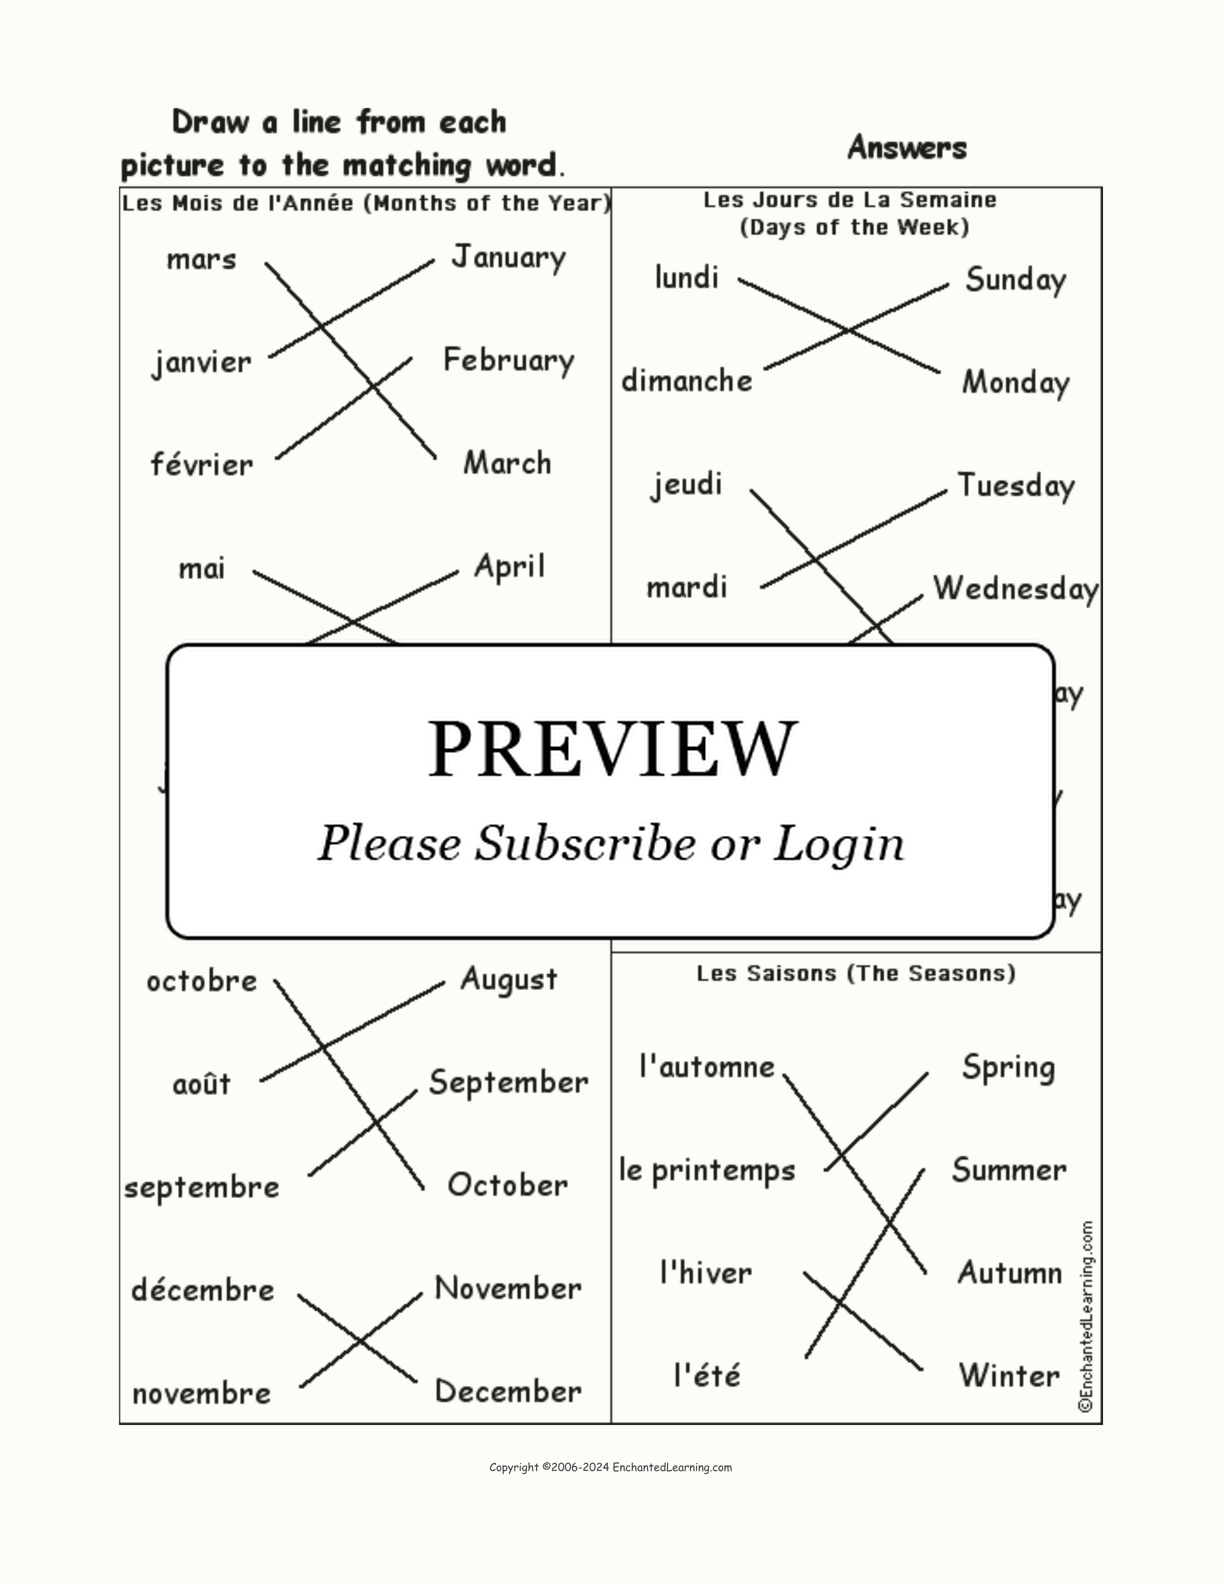 Match the French Calendar Words to the English Words interactive worksheet page 2